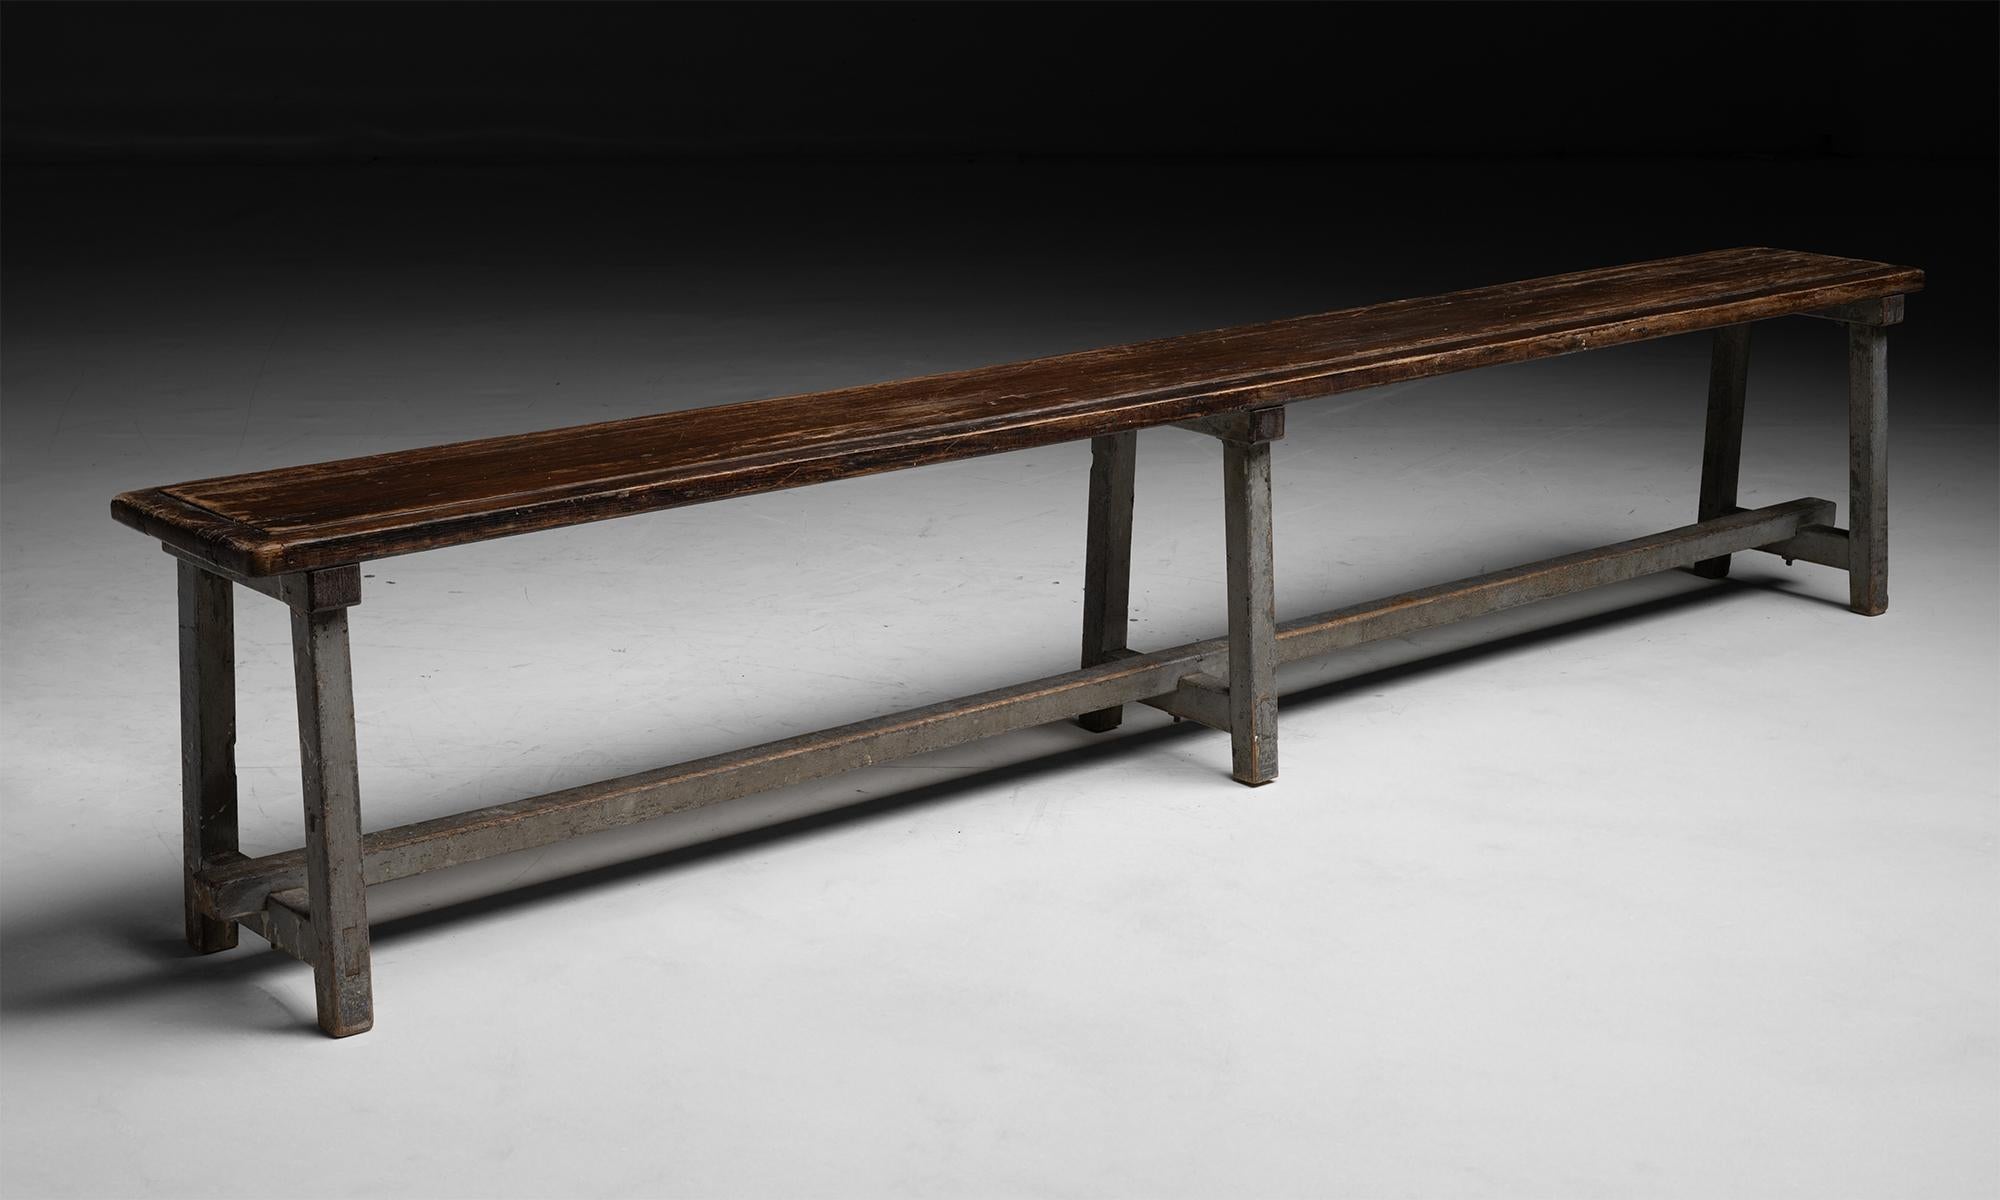 Primitive Benches
France circa 1900
Slatted wood benches with weathered
94.5”L x 11.25”d x 18.75”h